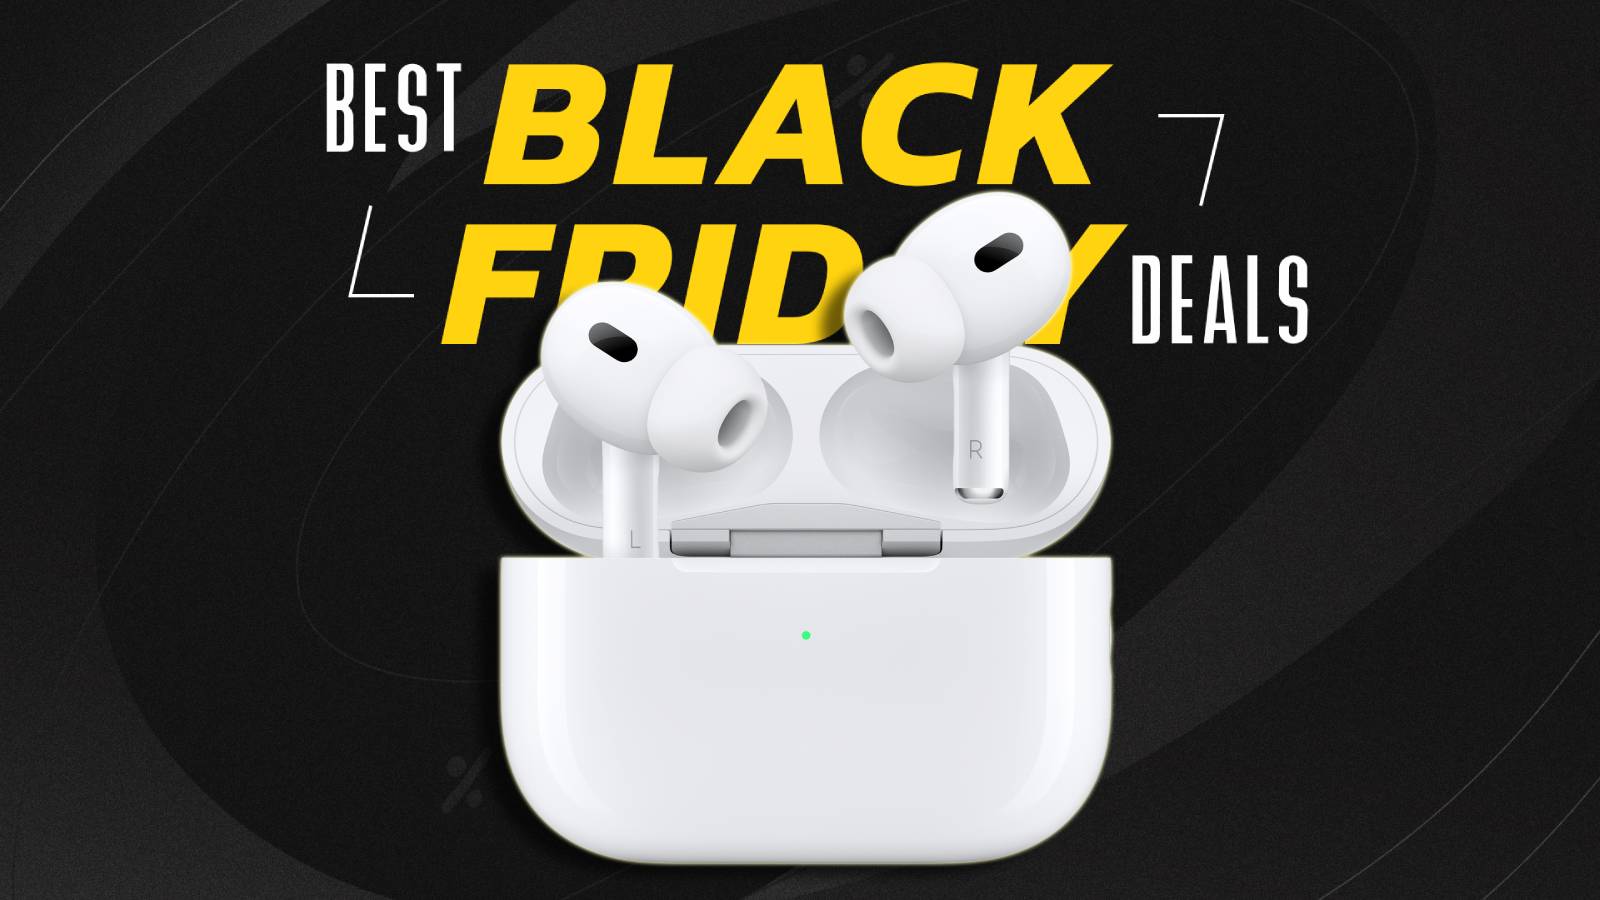 Apple AirPods Are at Their Lowest Prices Ever at 's Black